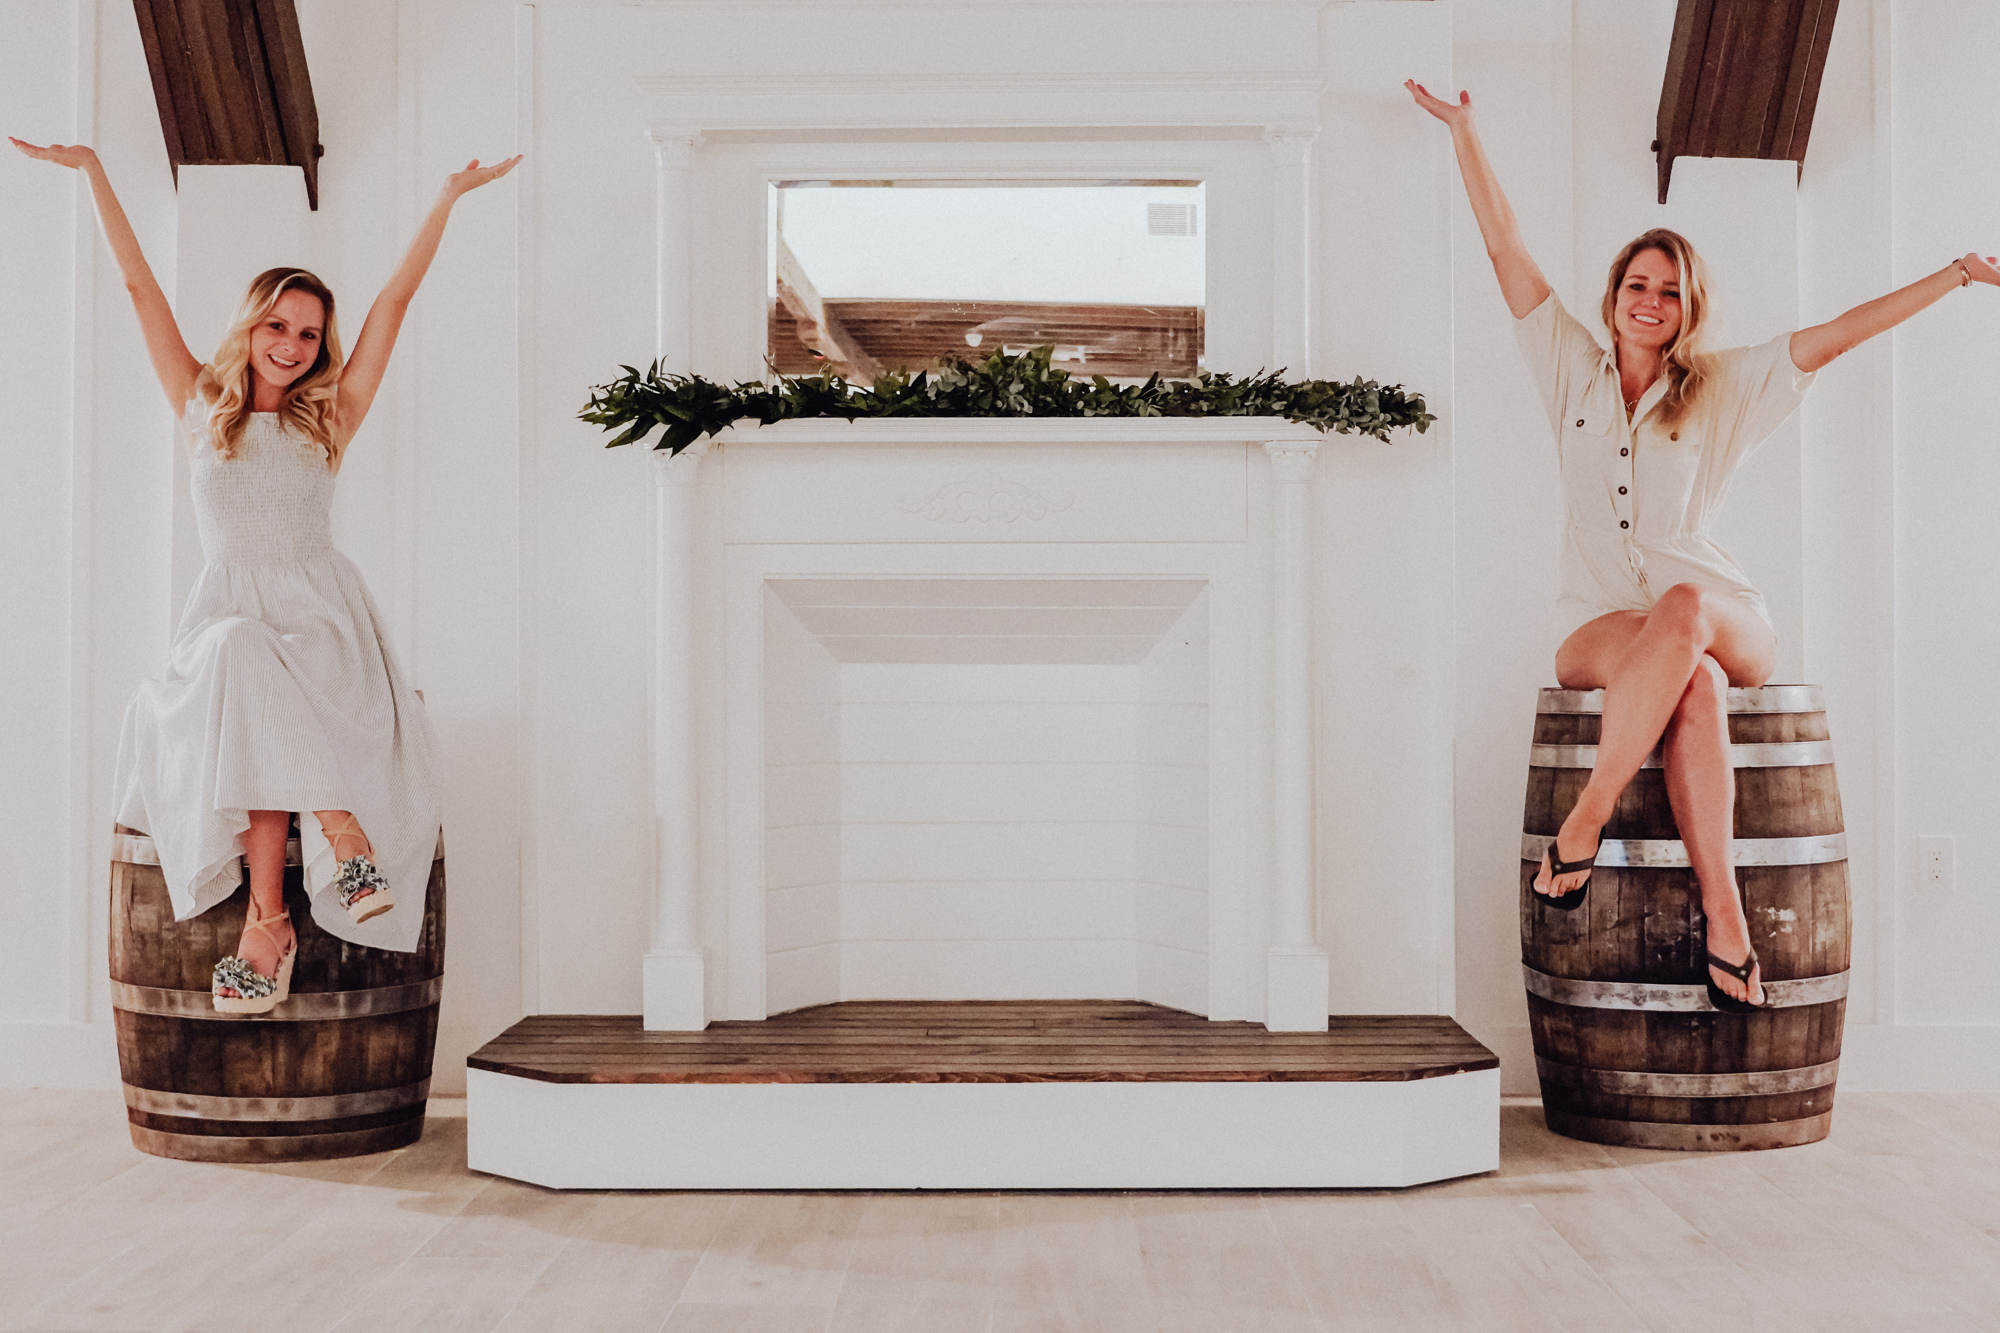 Caley Hayes and Shauna Altes are excited to welcome brides to the Grand Ol' Barn starting later this June. Photo courtesy of the Locke Agency